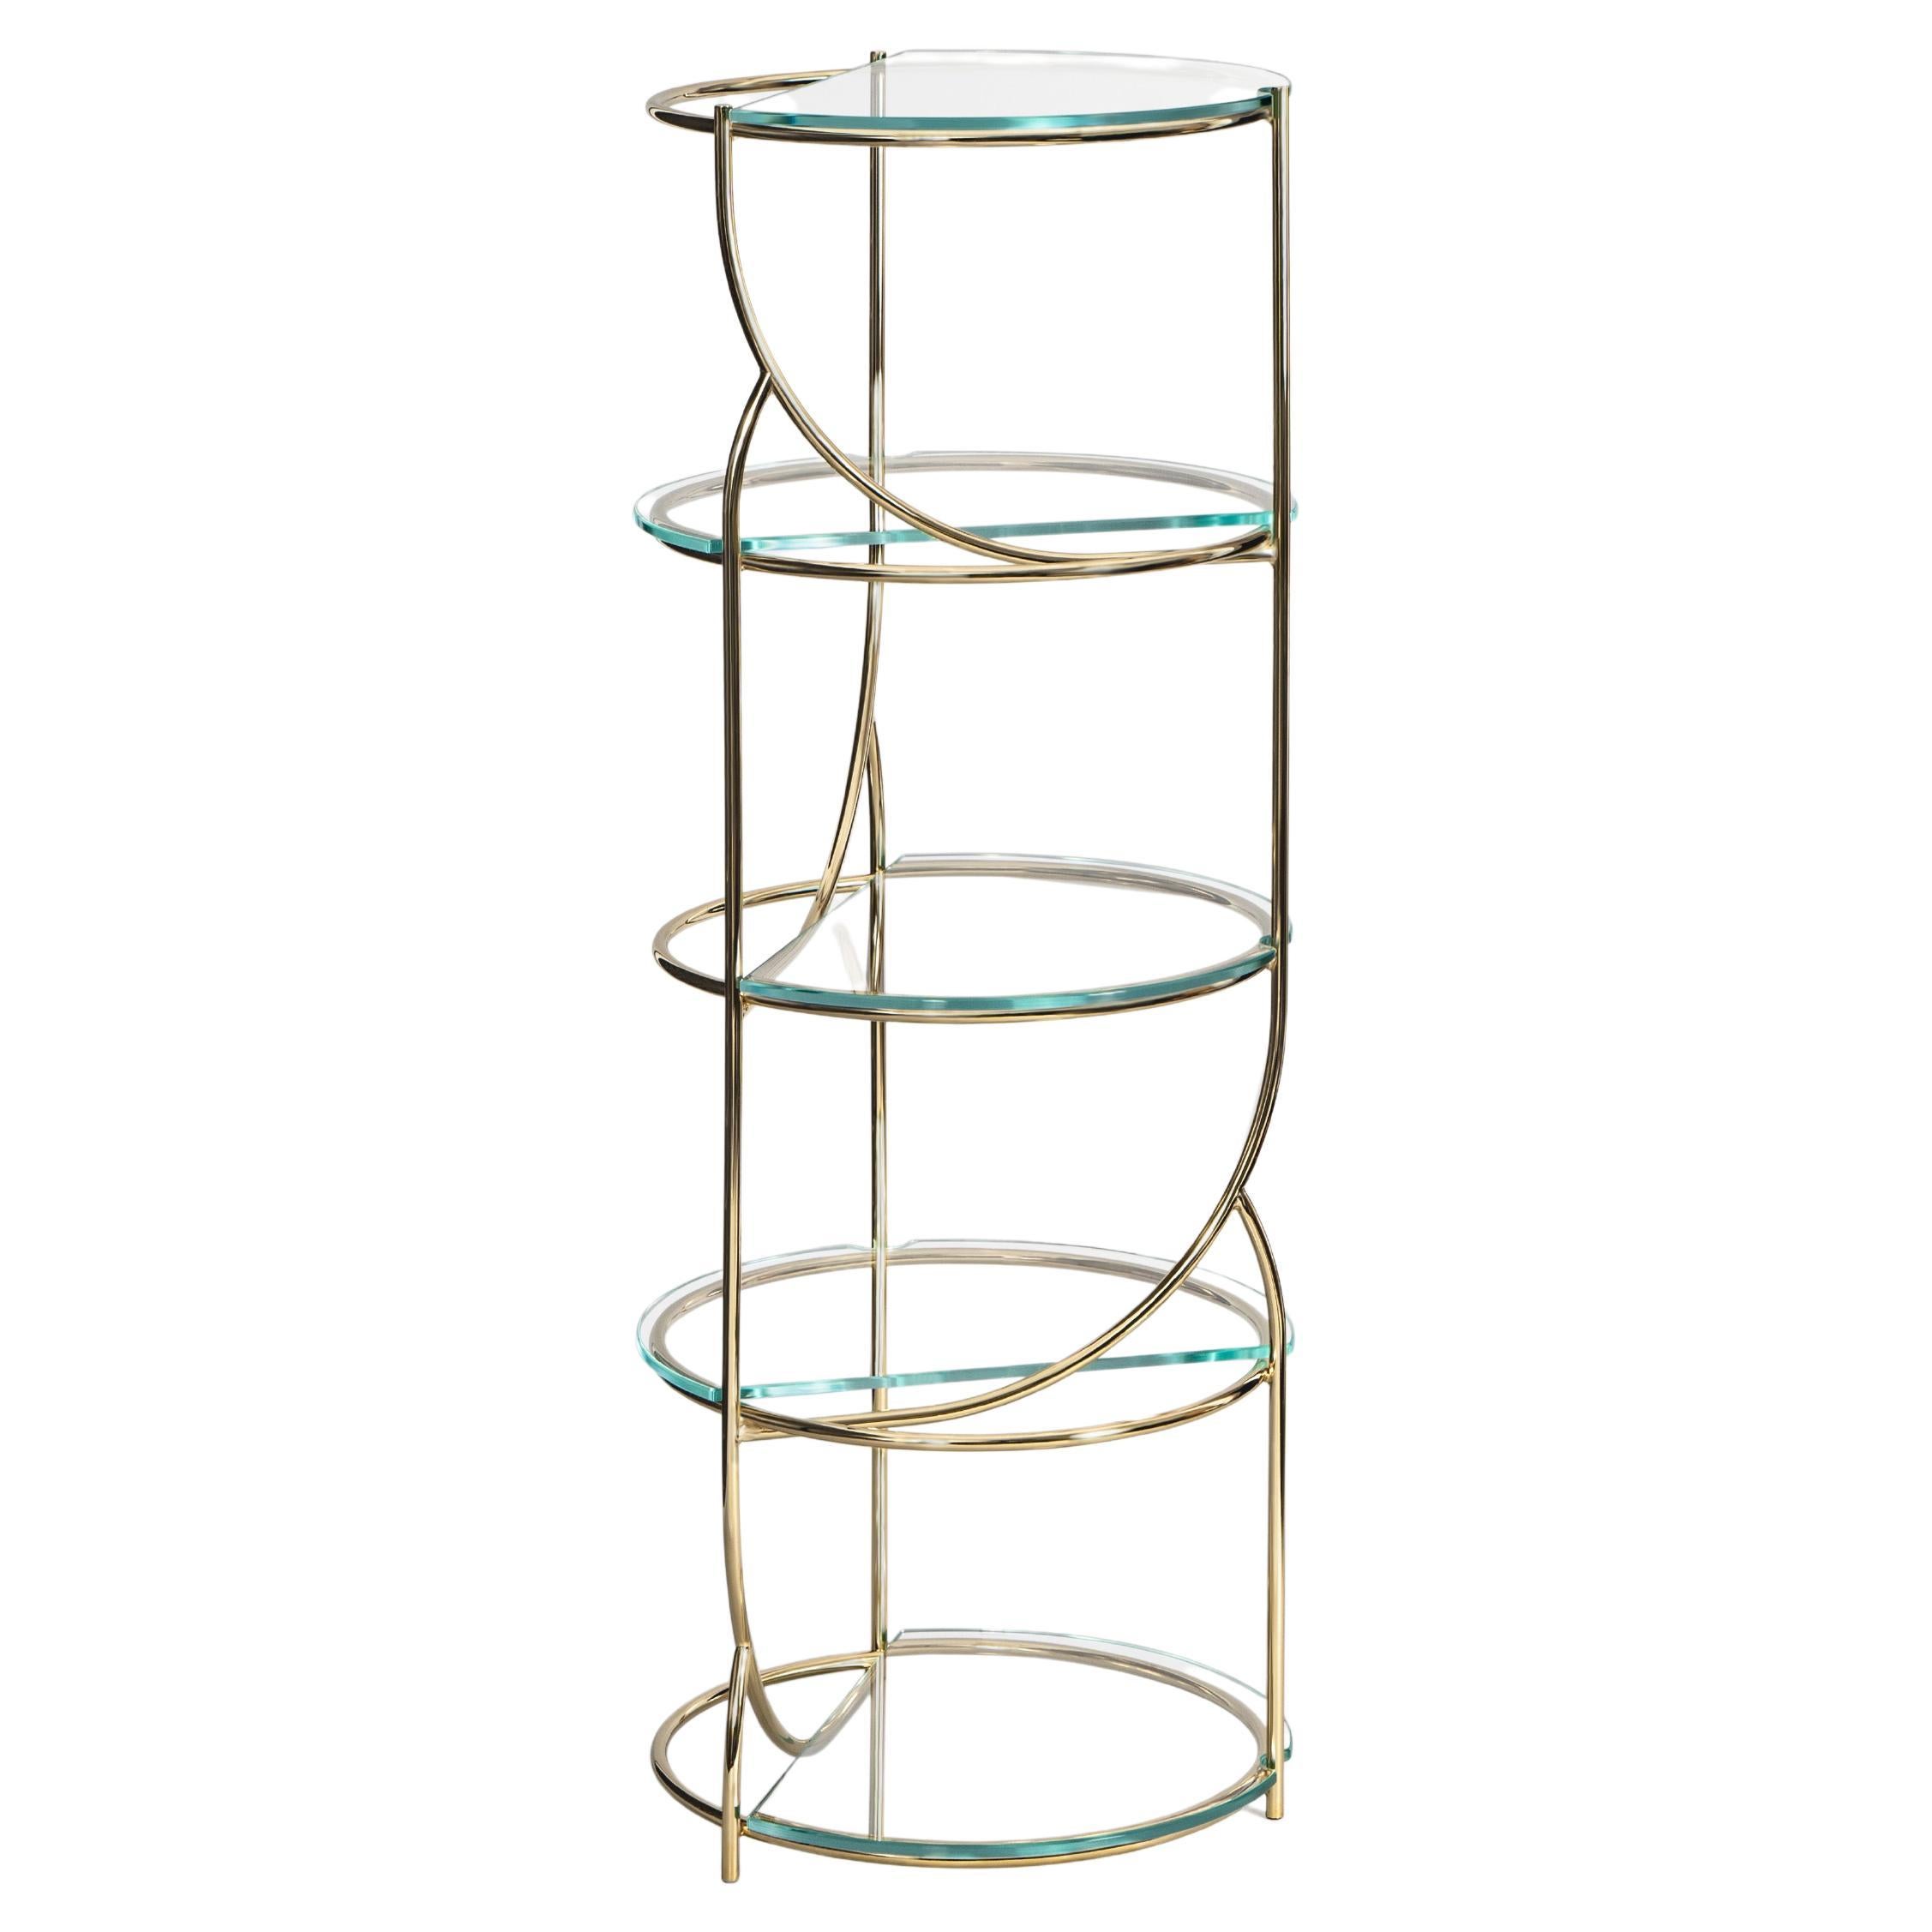 Cosettina Gold, repositionable glass shelves made in Italy by Enrico Girotti For Sale